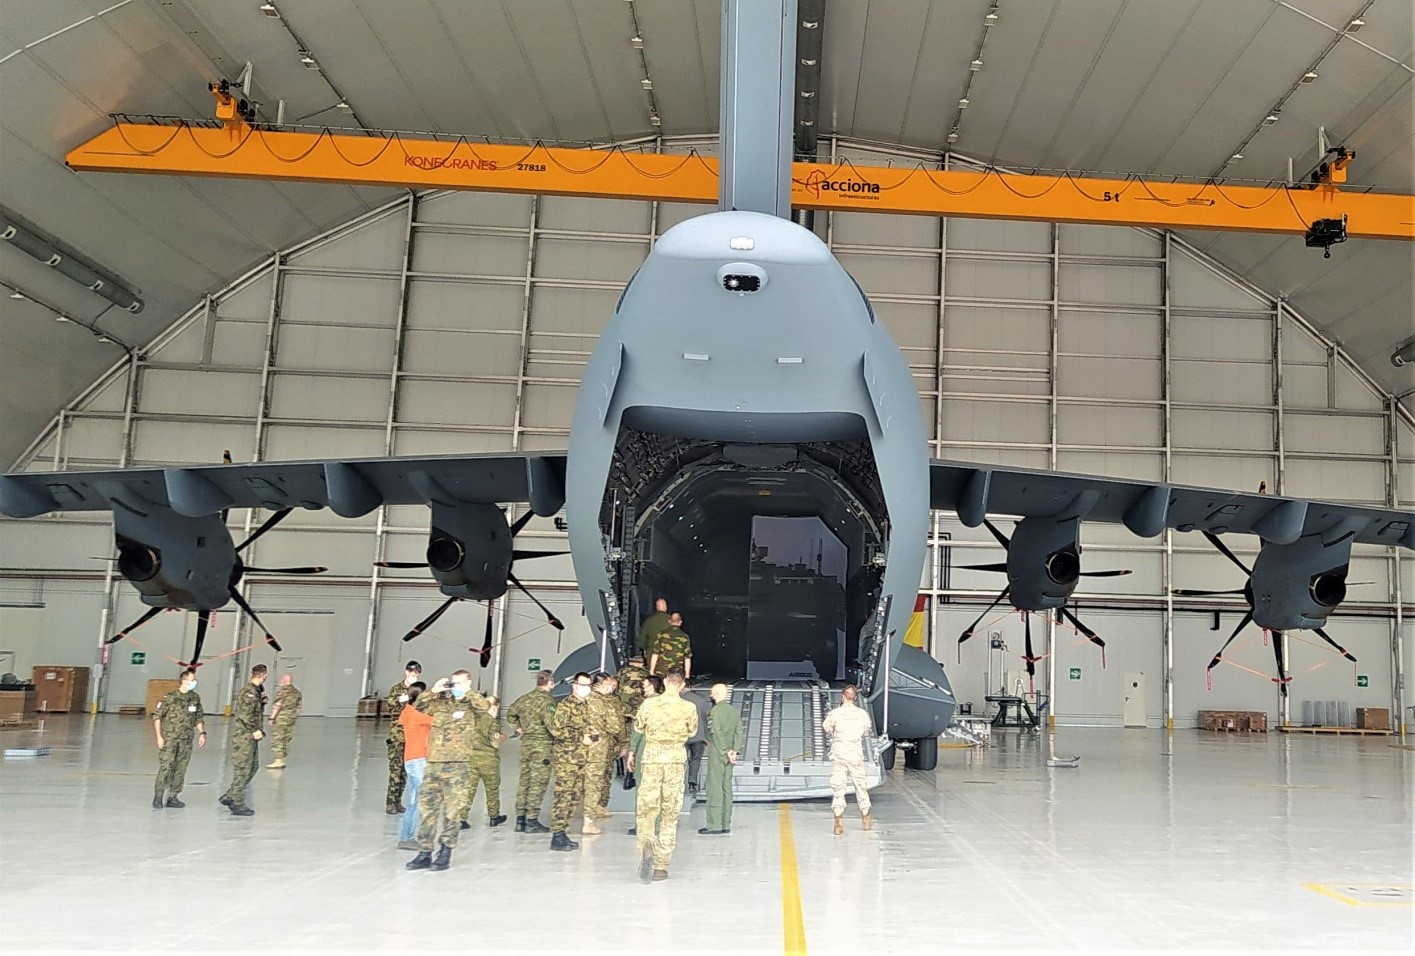 The representatives watching the A400M